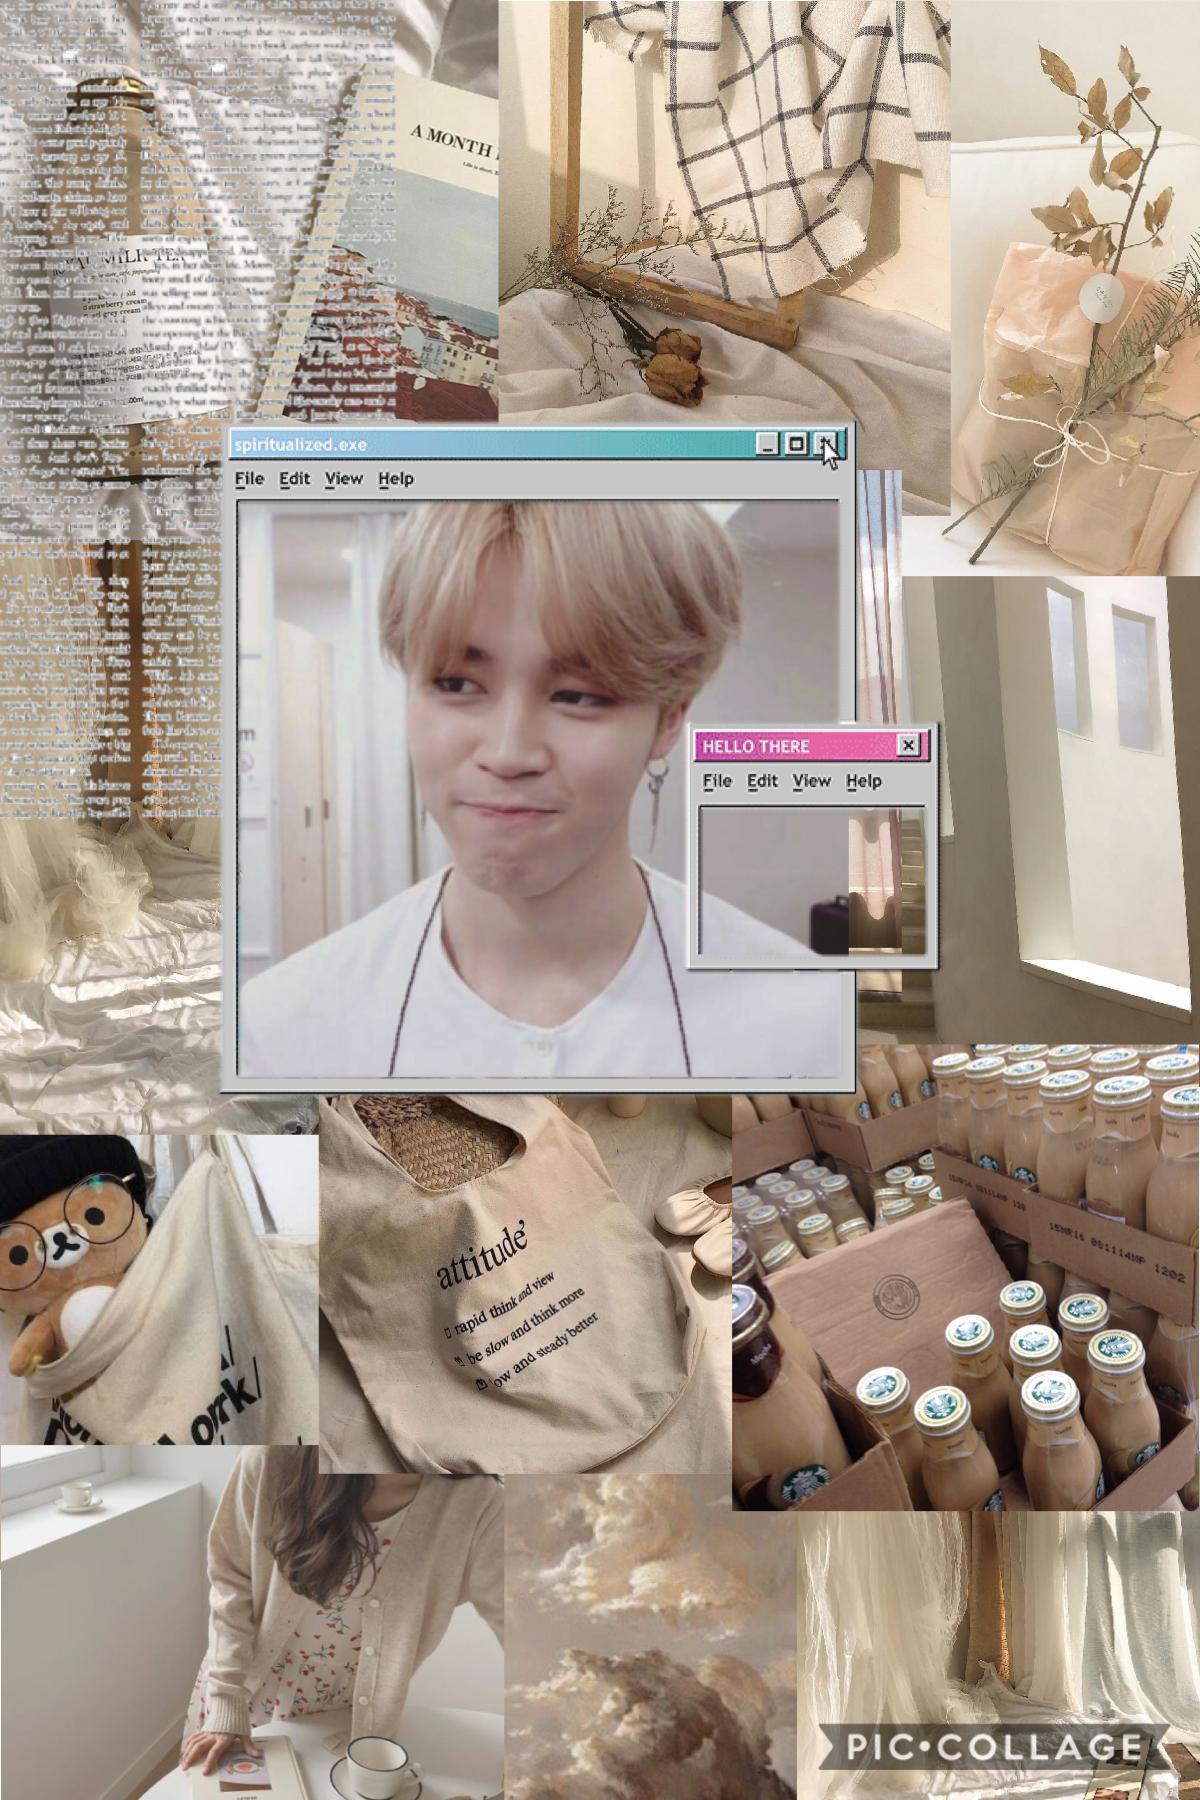 welcome to jimin's cafe, open up ☕️

🐶//park jimin

i dont like this hsjsjshsjhsj it took me like 5 minutes to make but whatever

for my akp friend adamoonchild :D

song of the day: 9 and three quarters (run away) by txt ♪